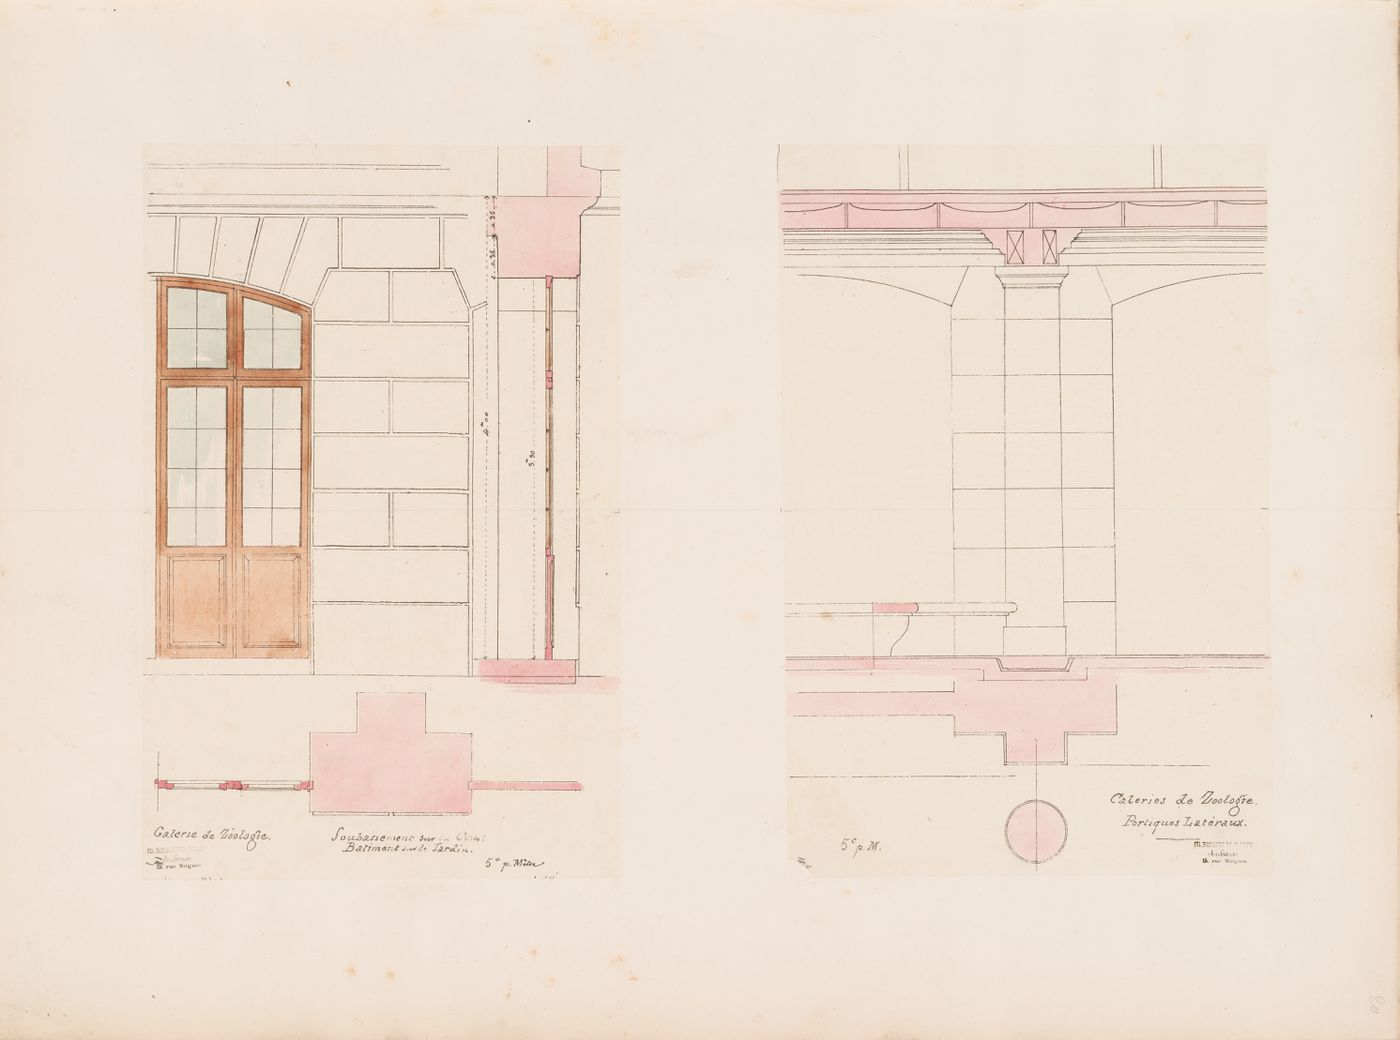 Project for a Galerie de zoologie, 1846: Partial section, elevation and plan for the courtyard façade of the main wing, and partial section and plan for the side porticos